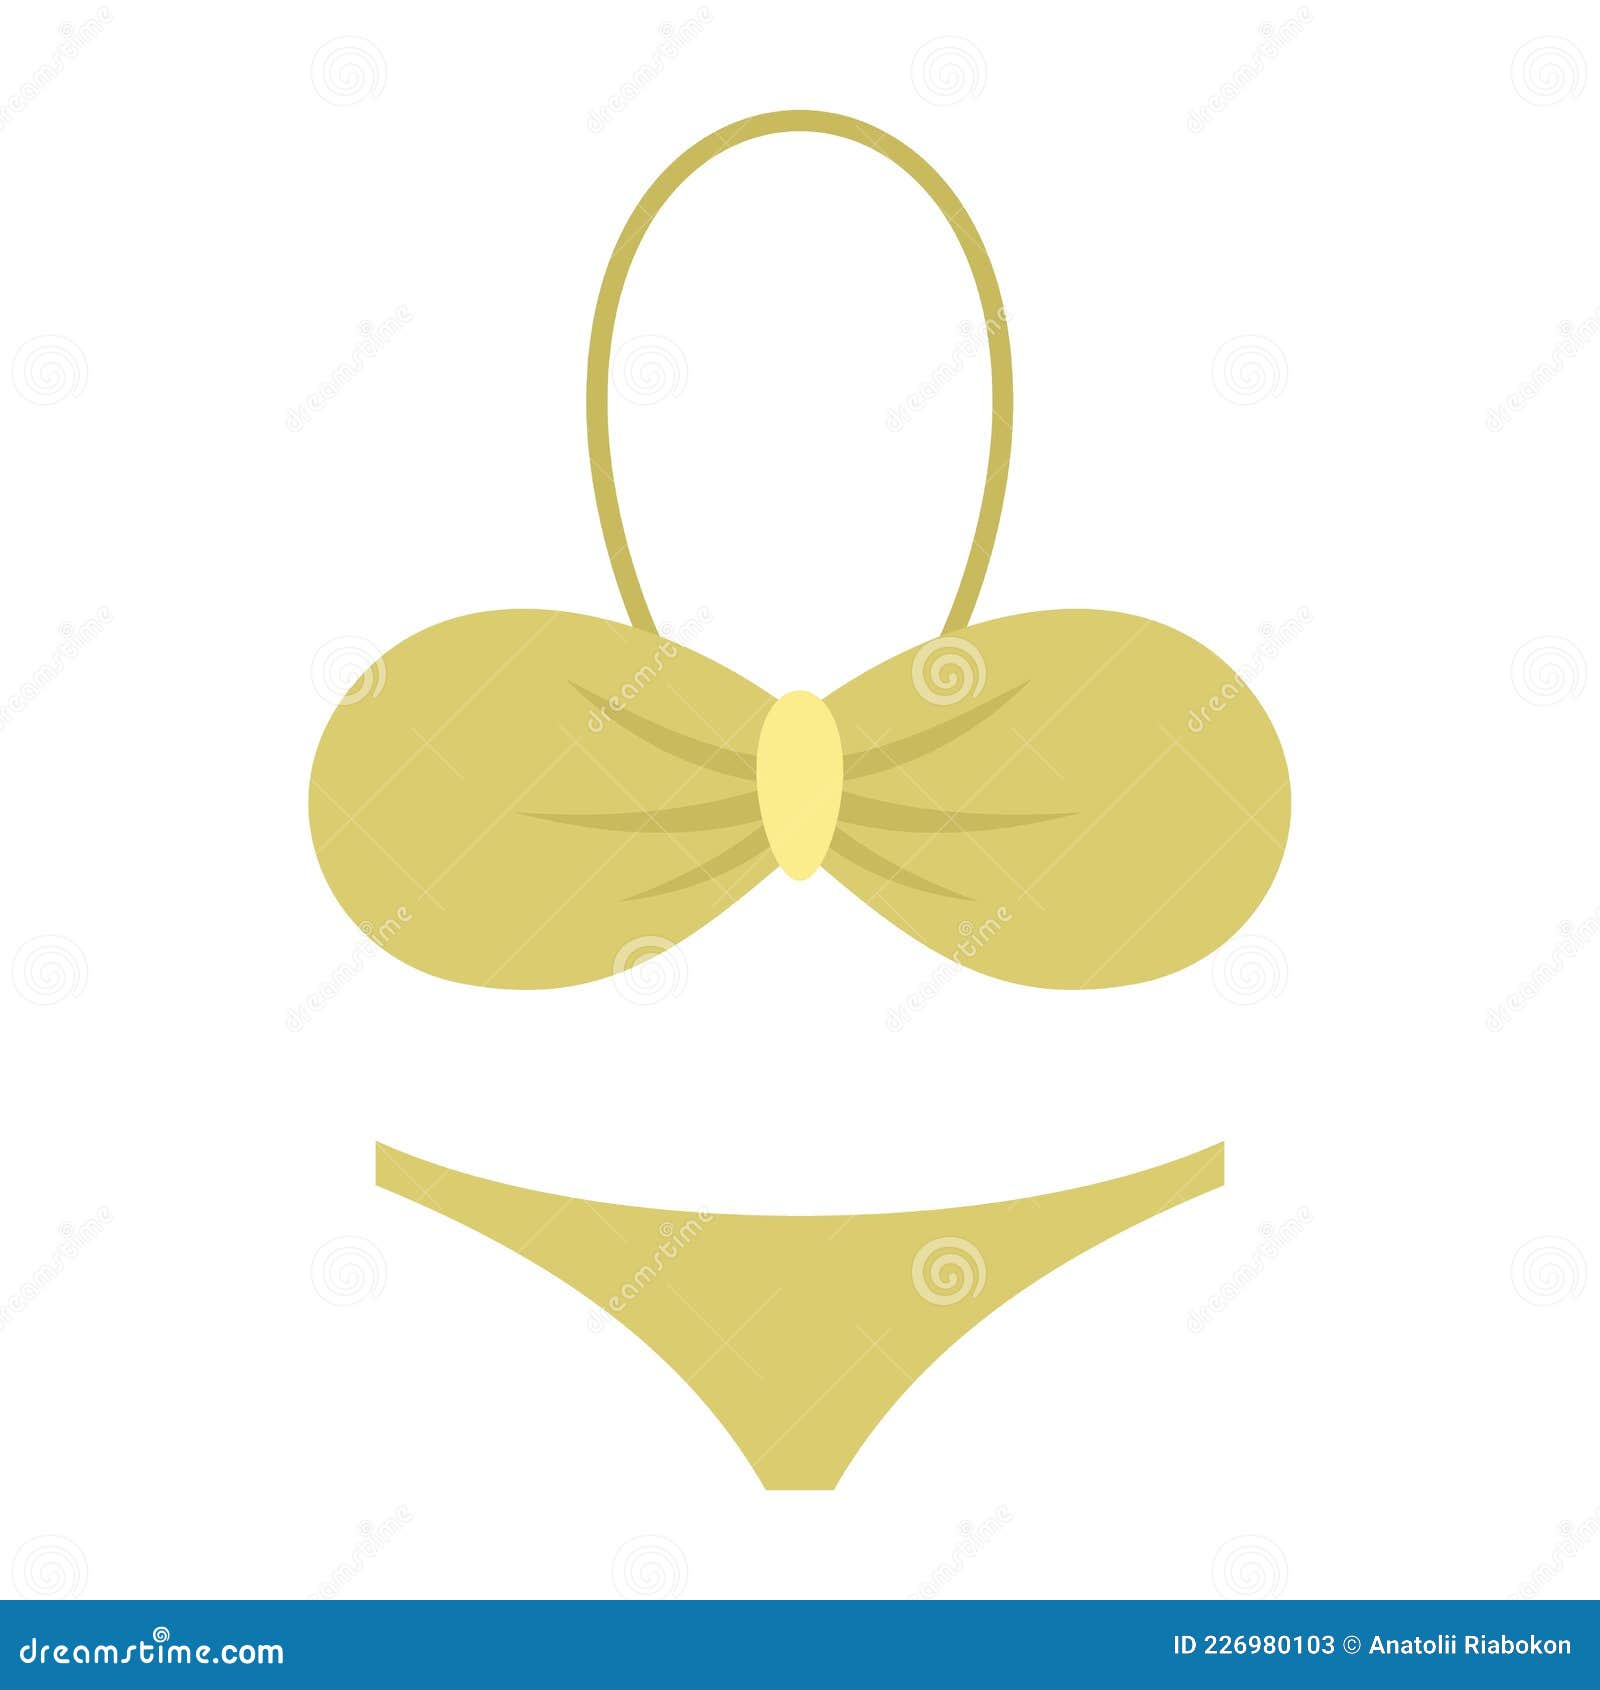 Swimsuit Icon Flat Isolated Vector Stock Illustration Illustration Of Swimsuit Isolated